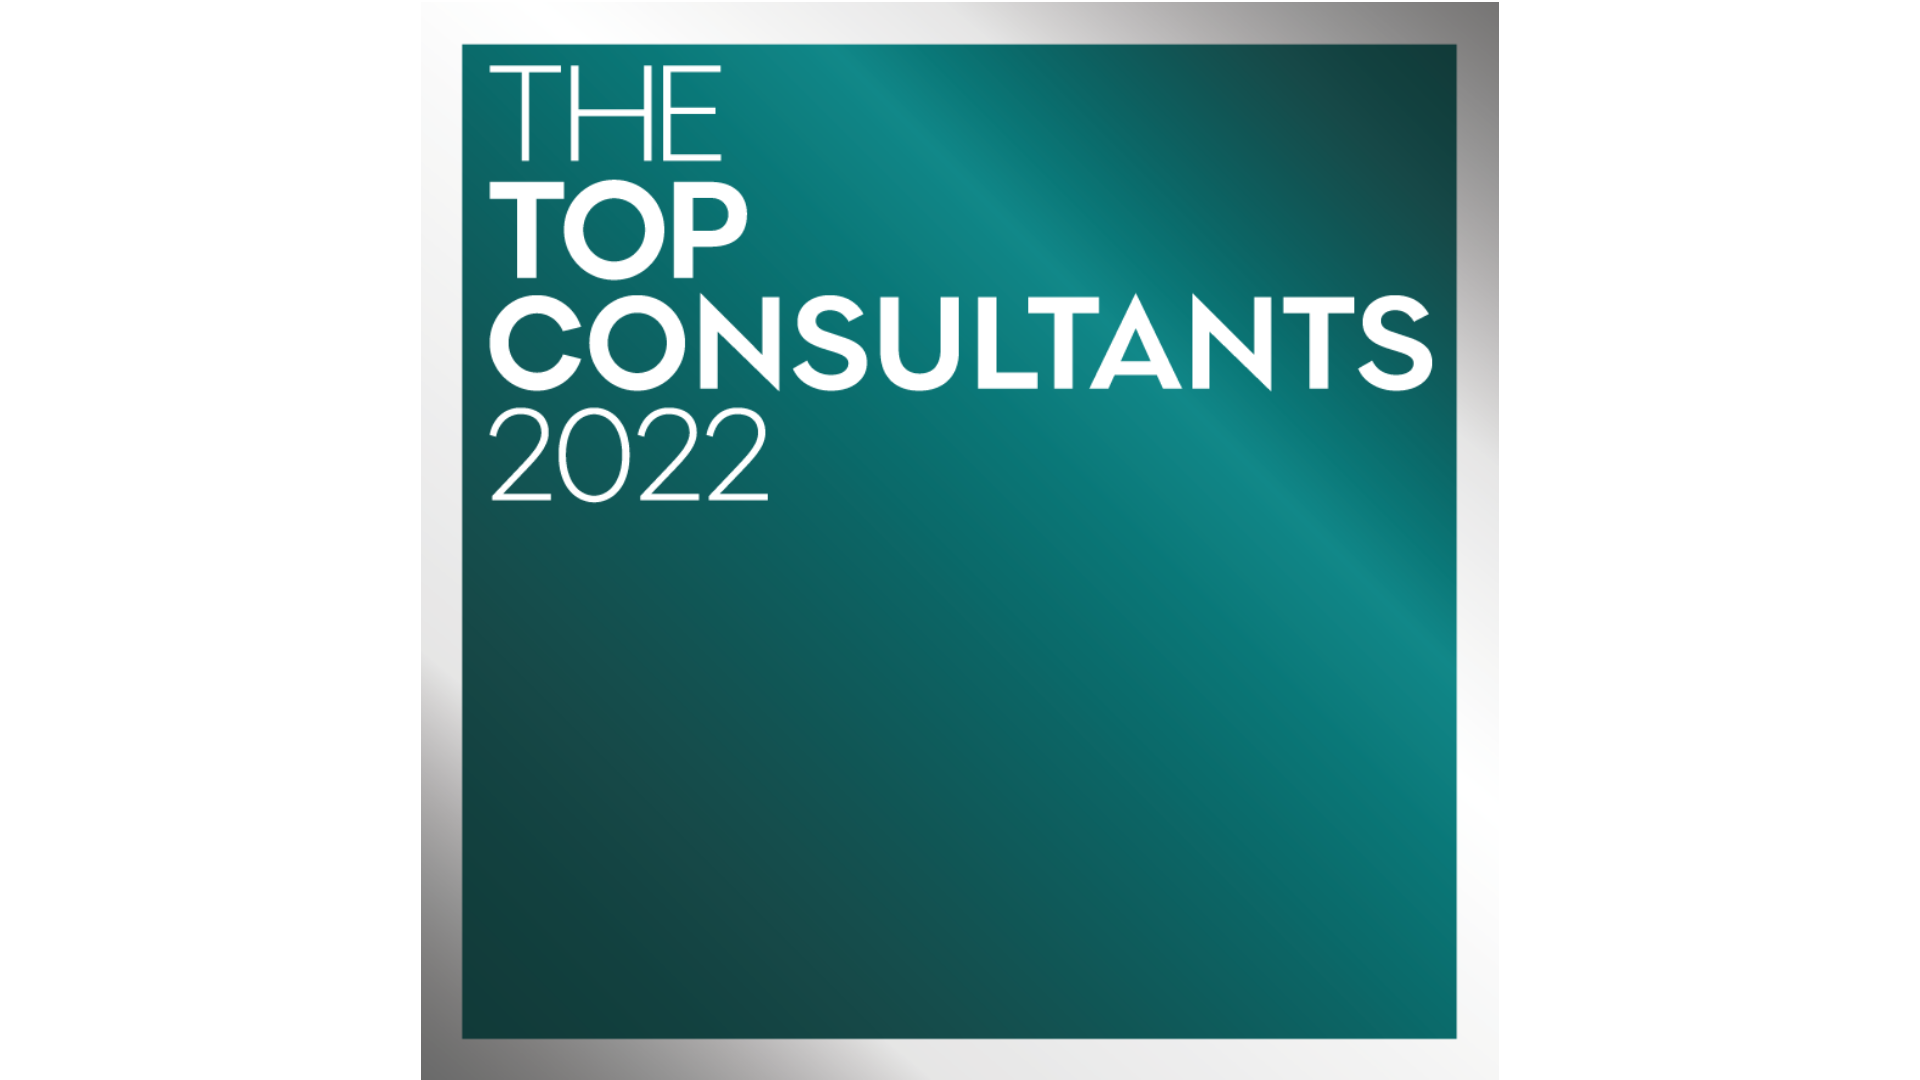 Meet The Top Consultants. Familiar Award. New Name.